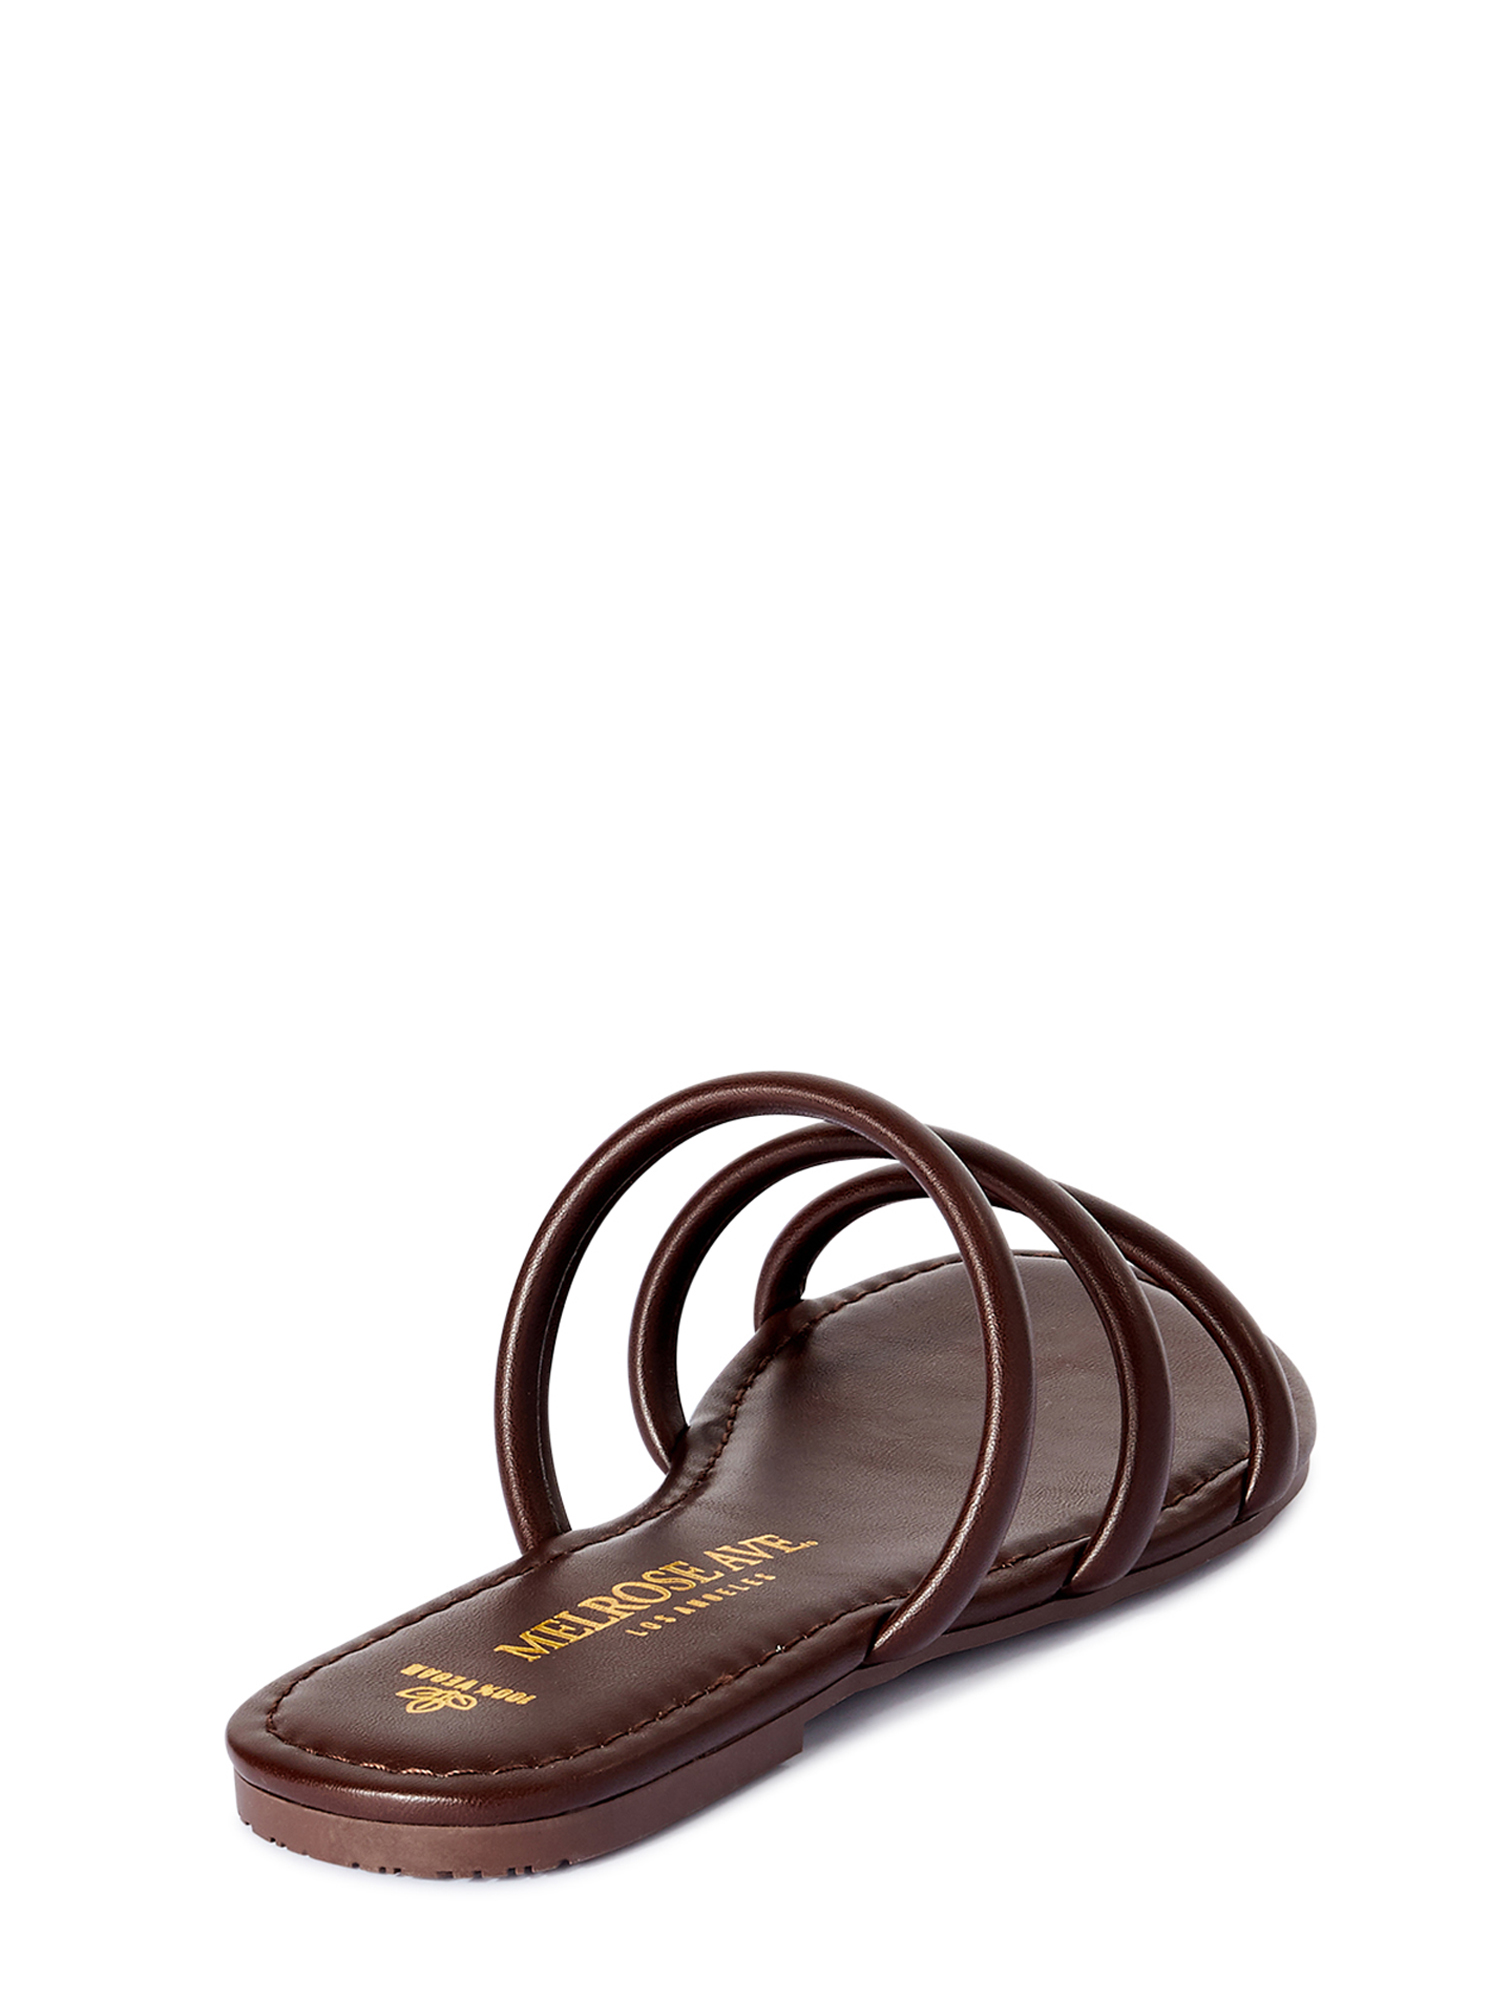 Melrose Ave Women's Faux Leather Three Strap Slide Sandals - image 3 of 6